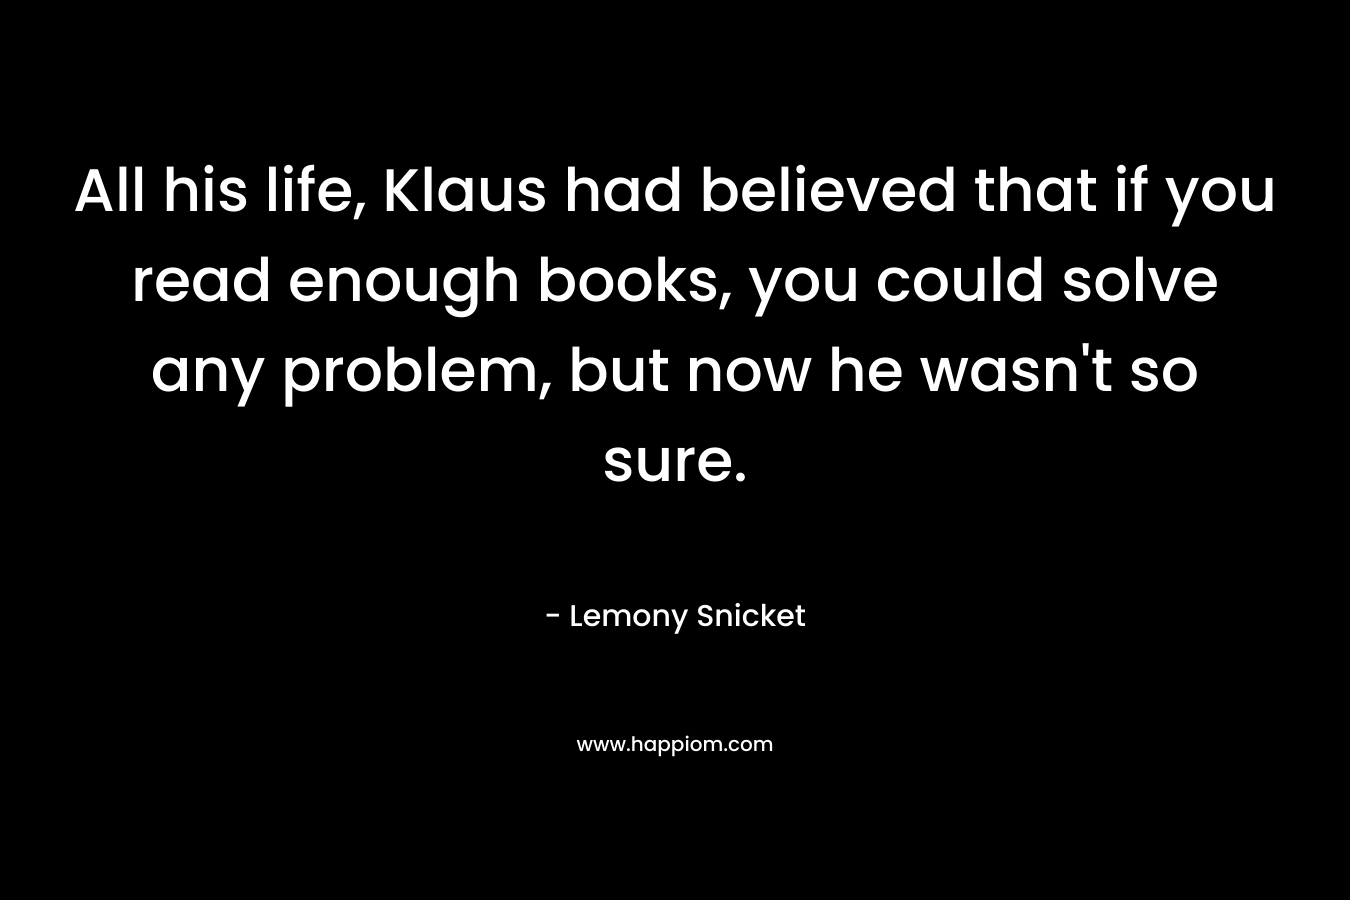 All his life, Klaus had believed that if you read enough books, you could solve any problem, but now he wasn't so sure.